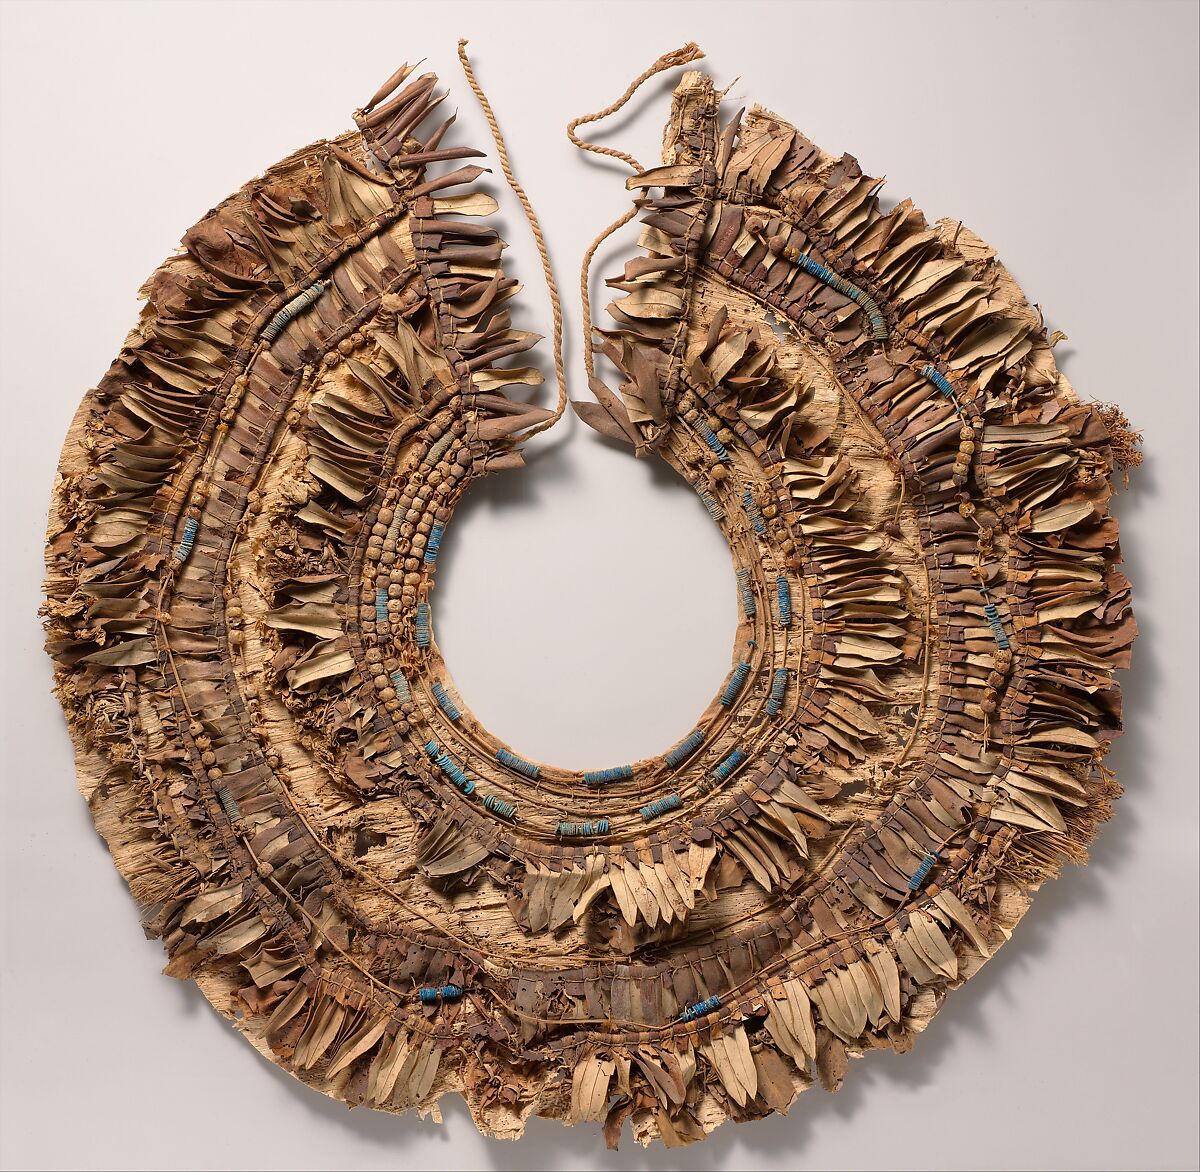 Floral collar from Tutankhamun's Embalming Cache, Papyrus, olive leaves, persea leaves, nightshade berries, celery (?), faience, linen dyed red 